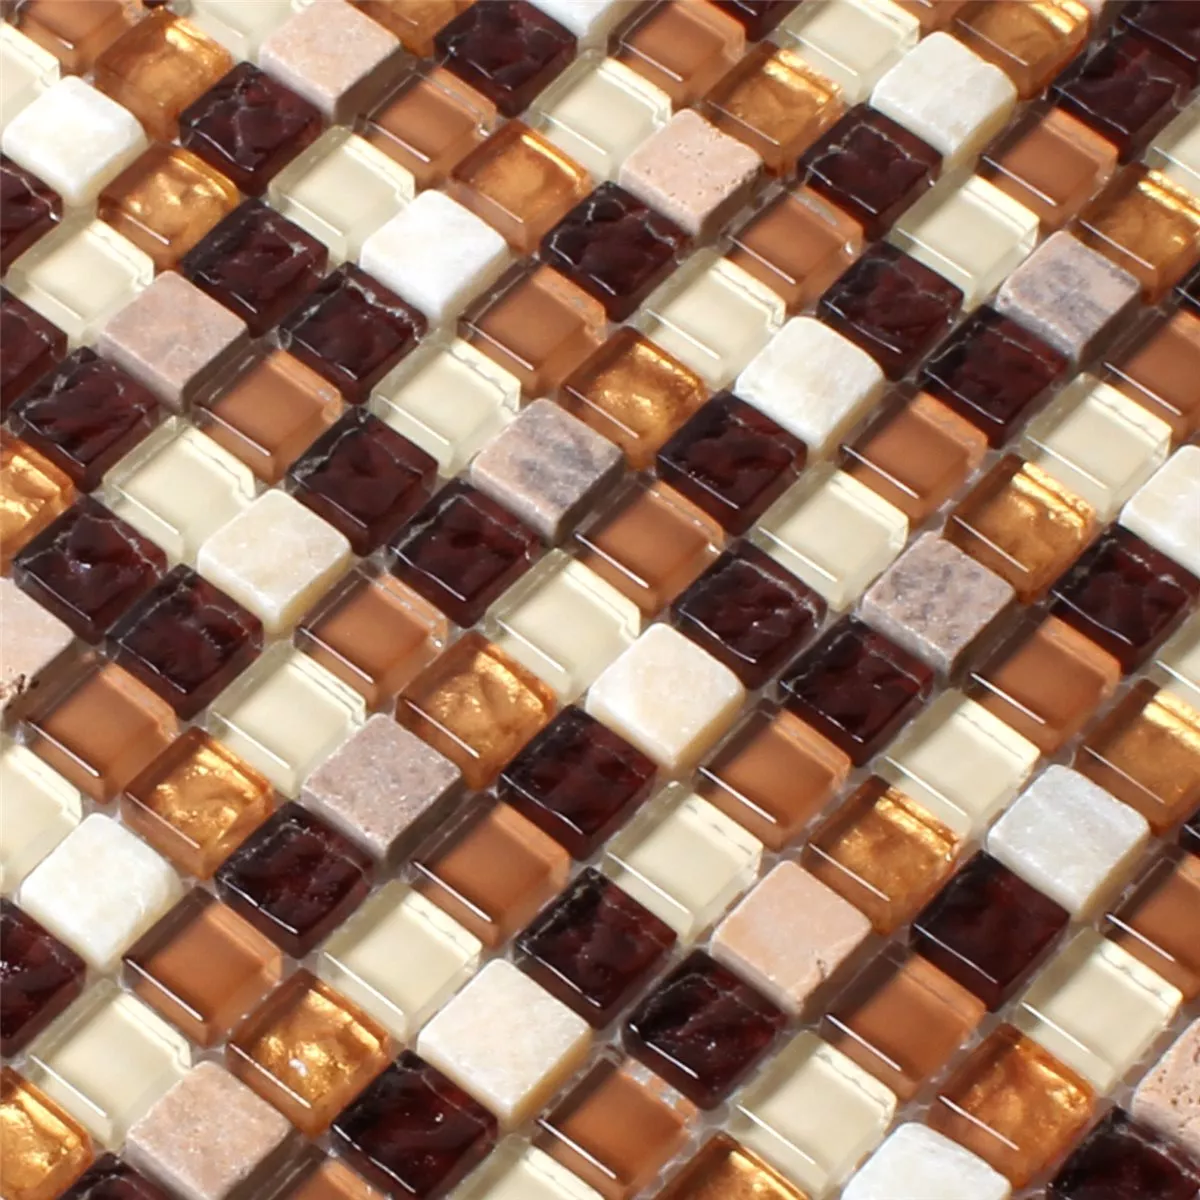 Mosaic Tiles Onyx Marble Brown Mix